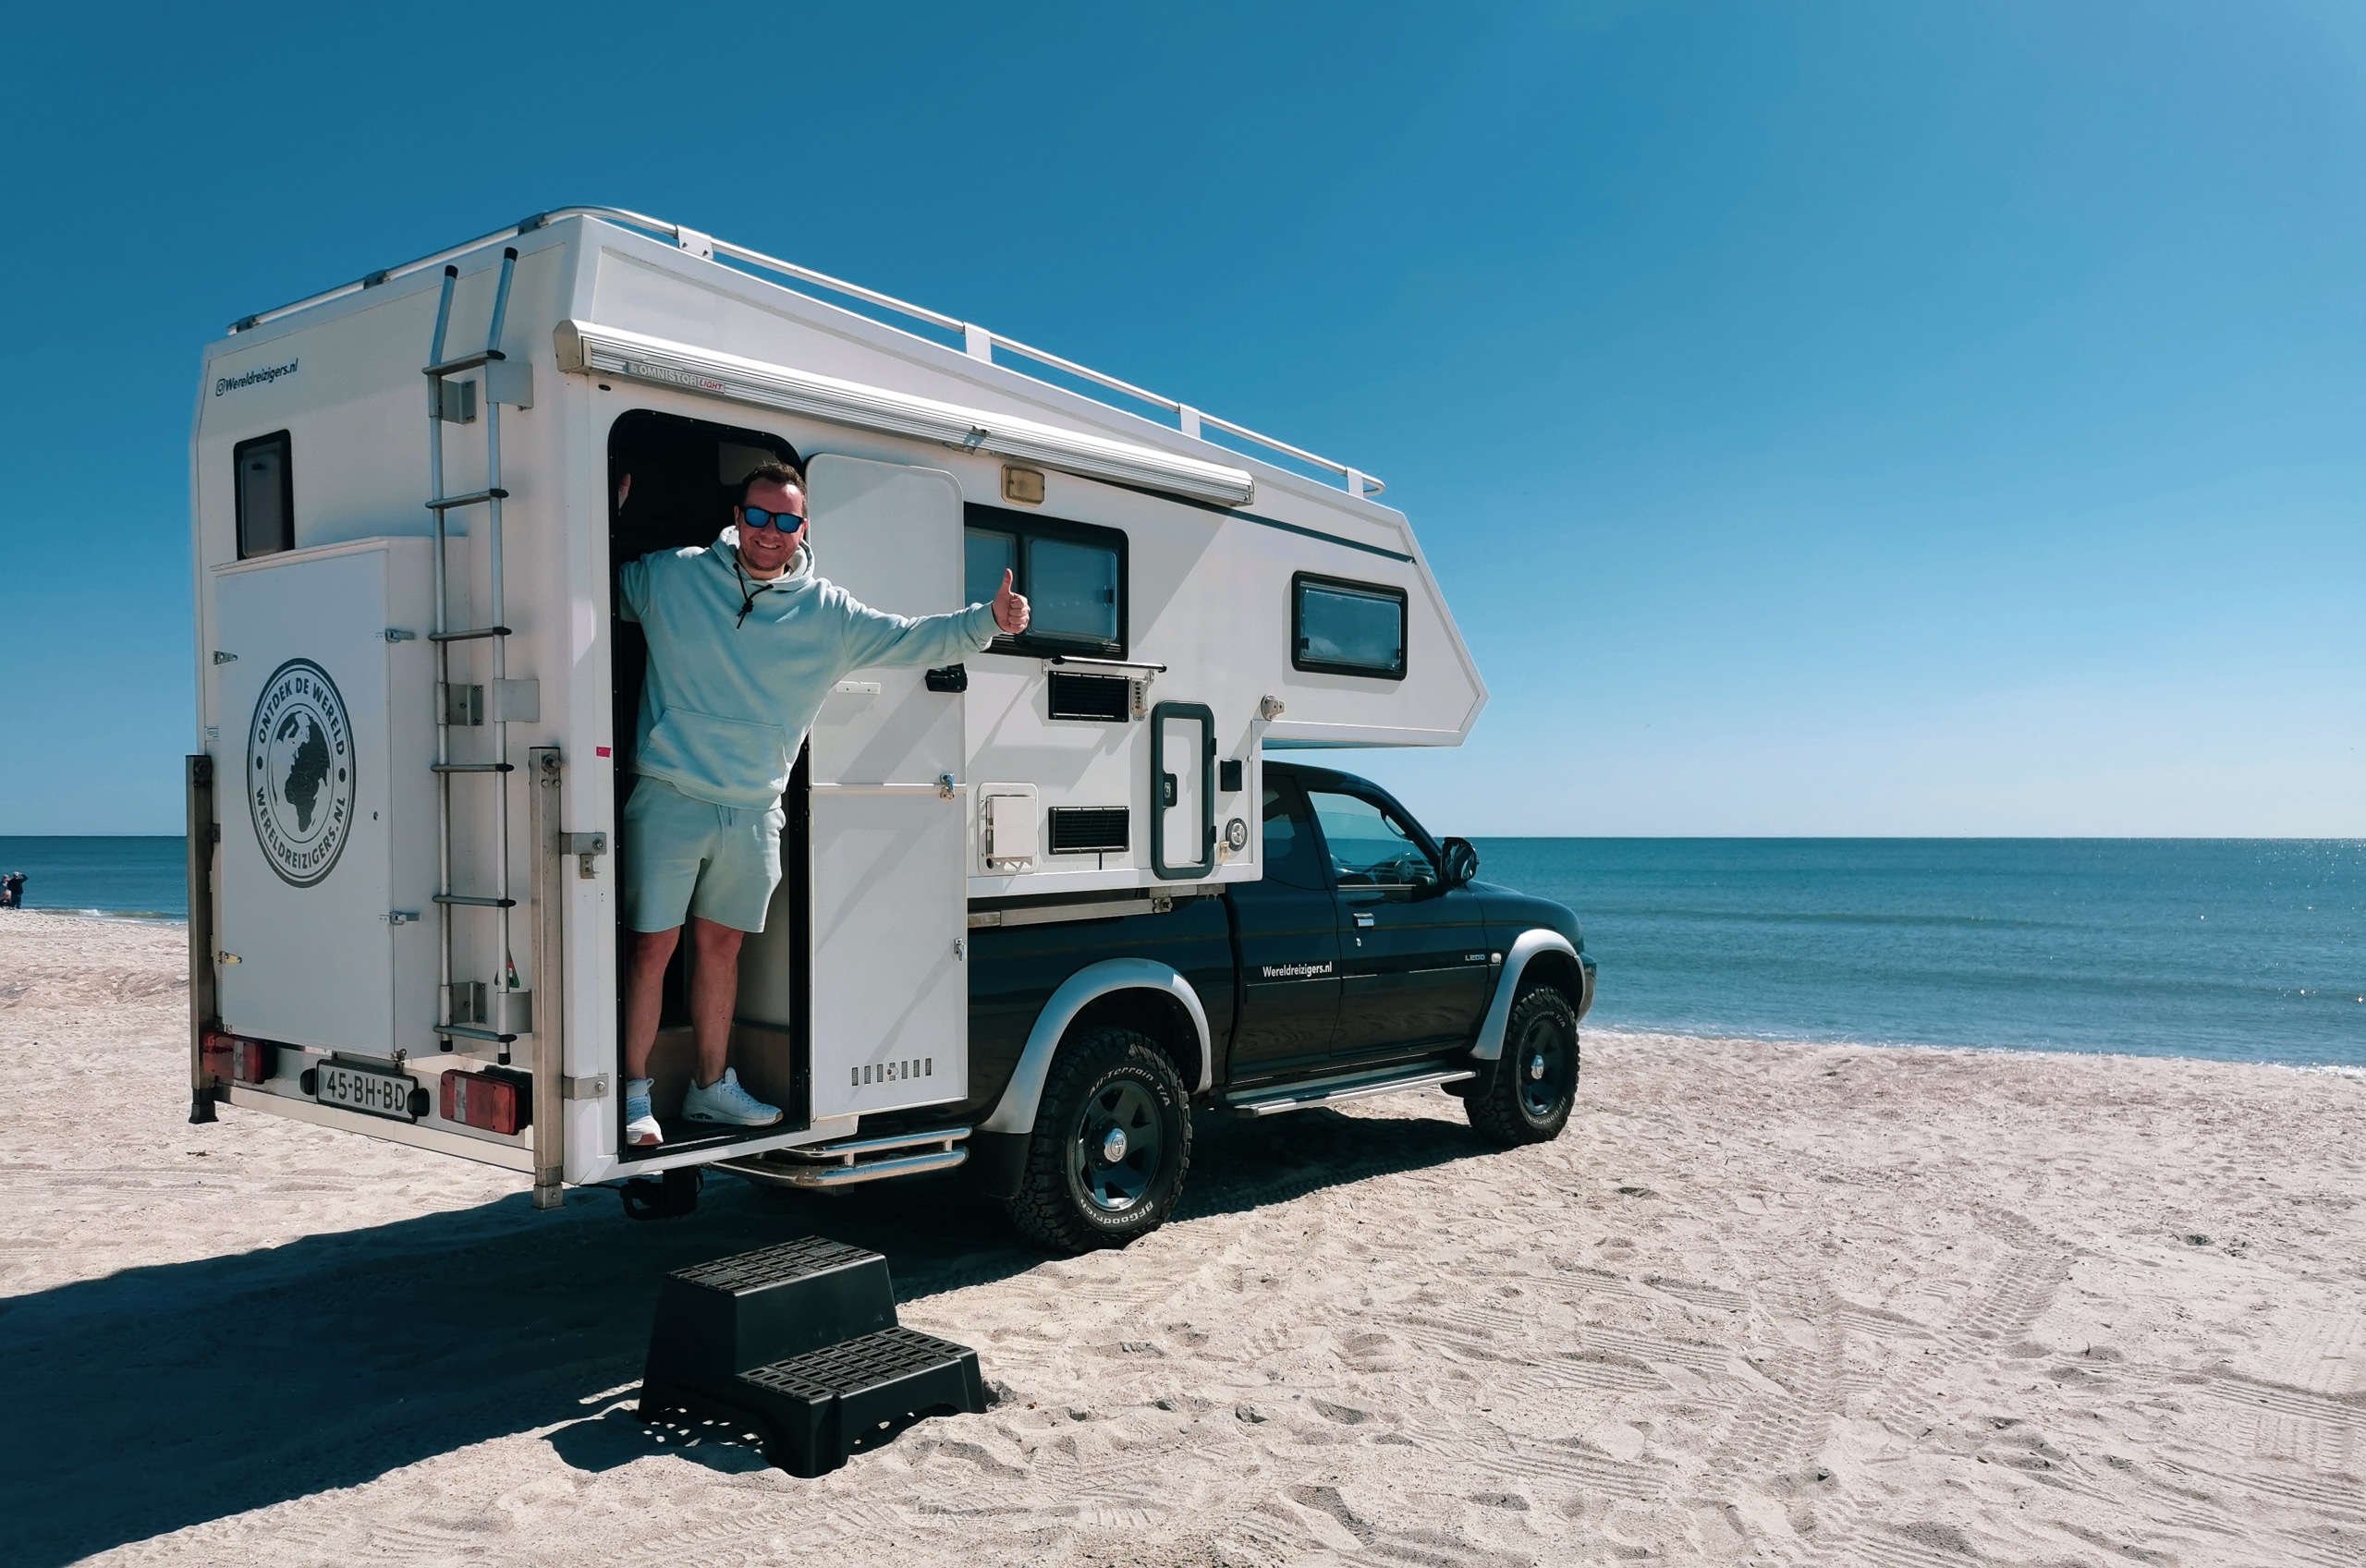 with the 4x4 camper on the beach in Florida